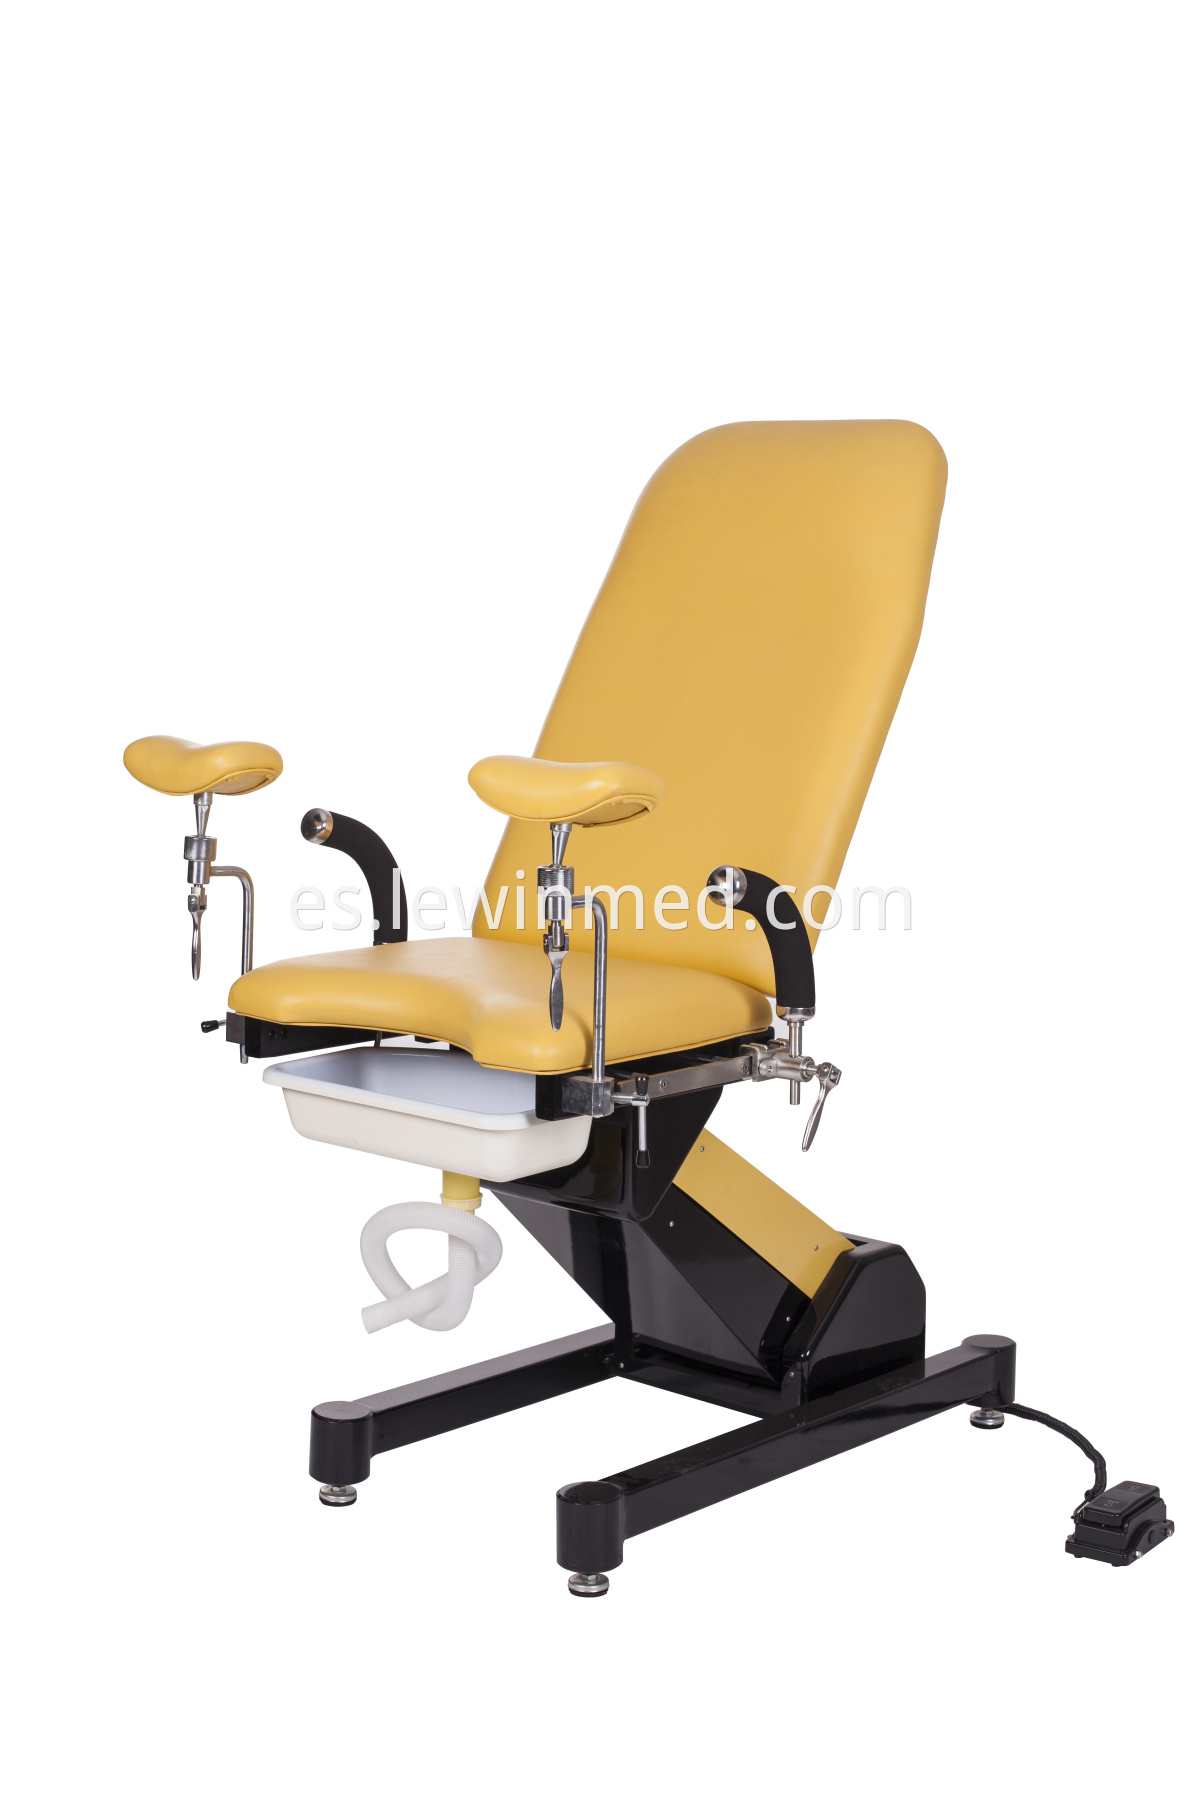 Electric gynecological examination bed